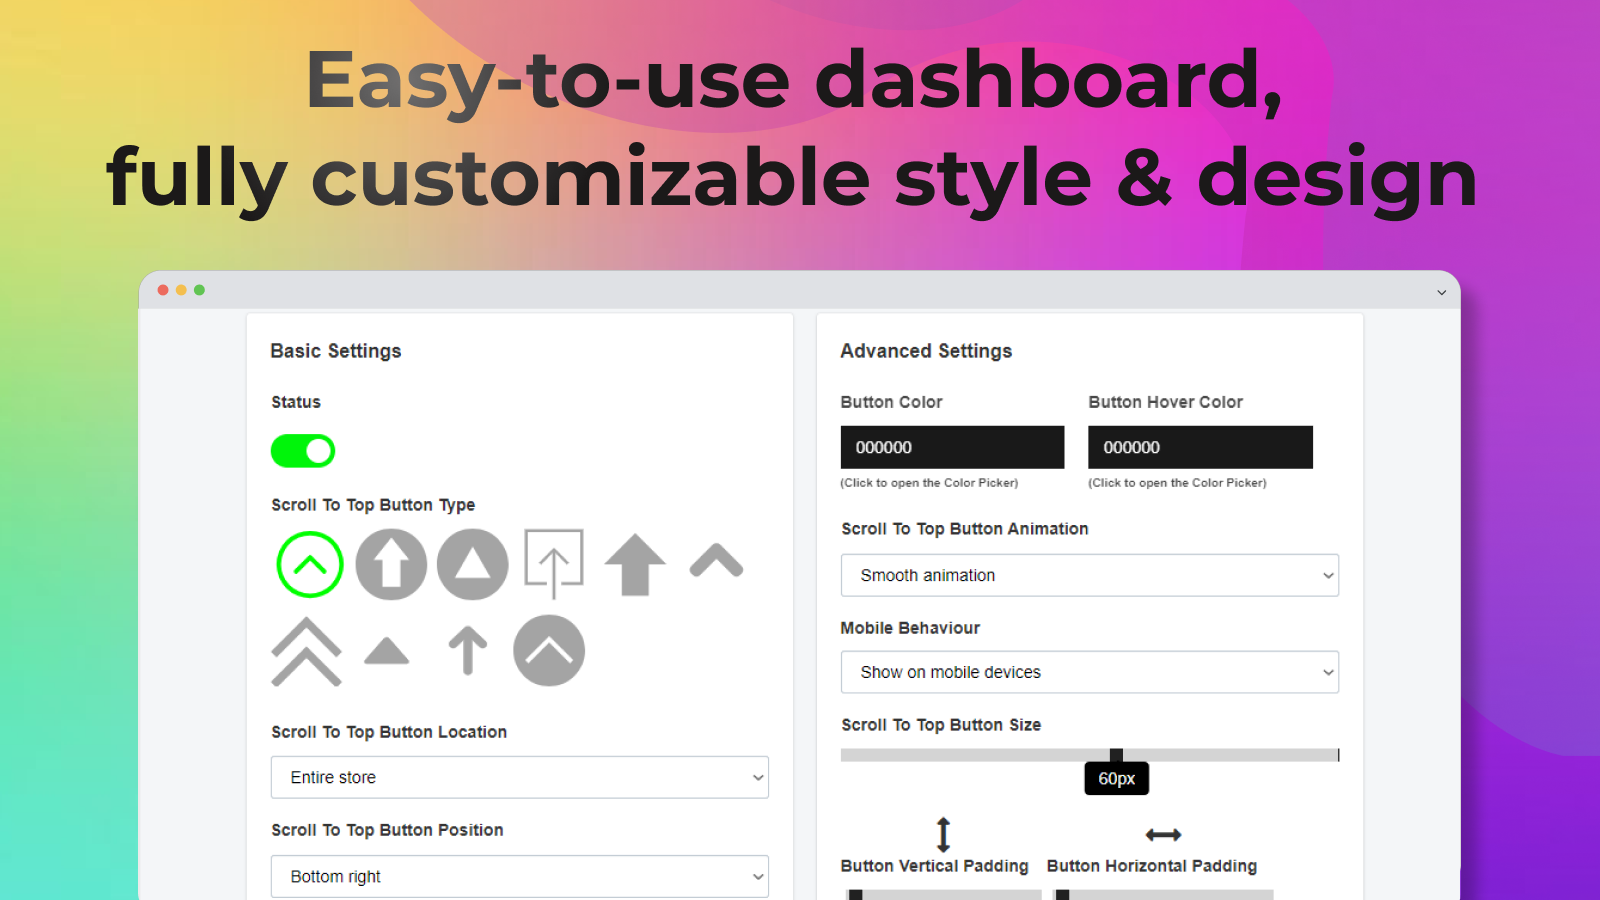 The easy to use dashboard of the app with customizable shapes